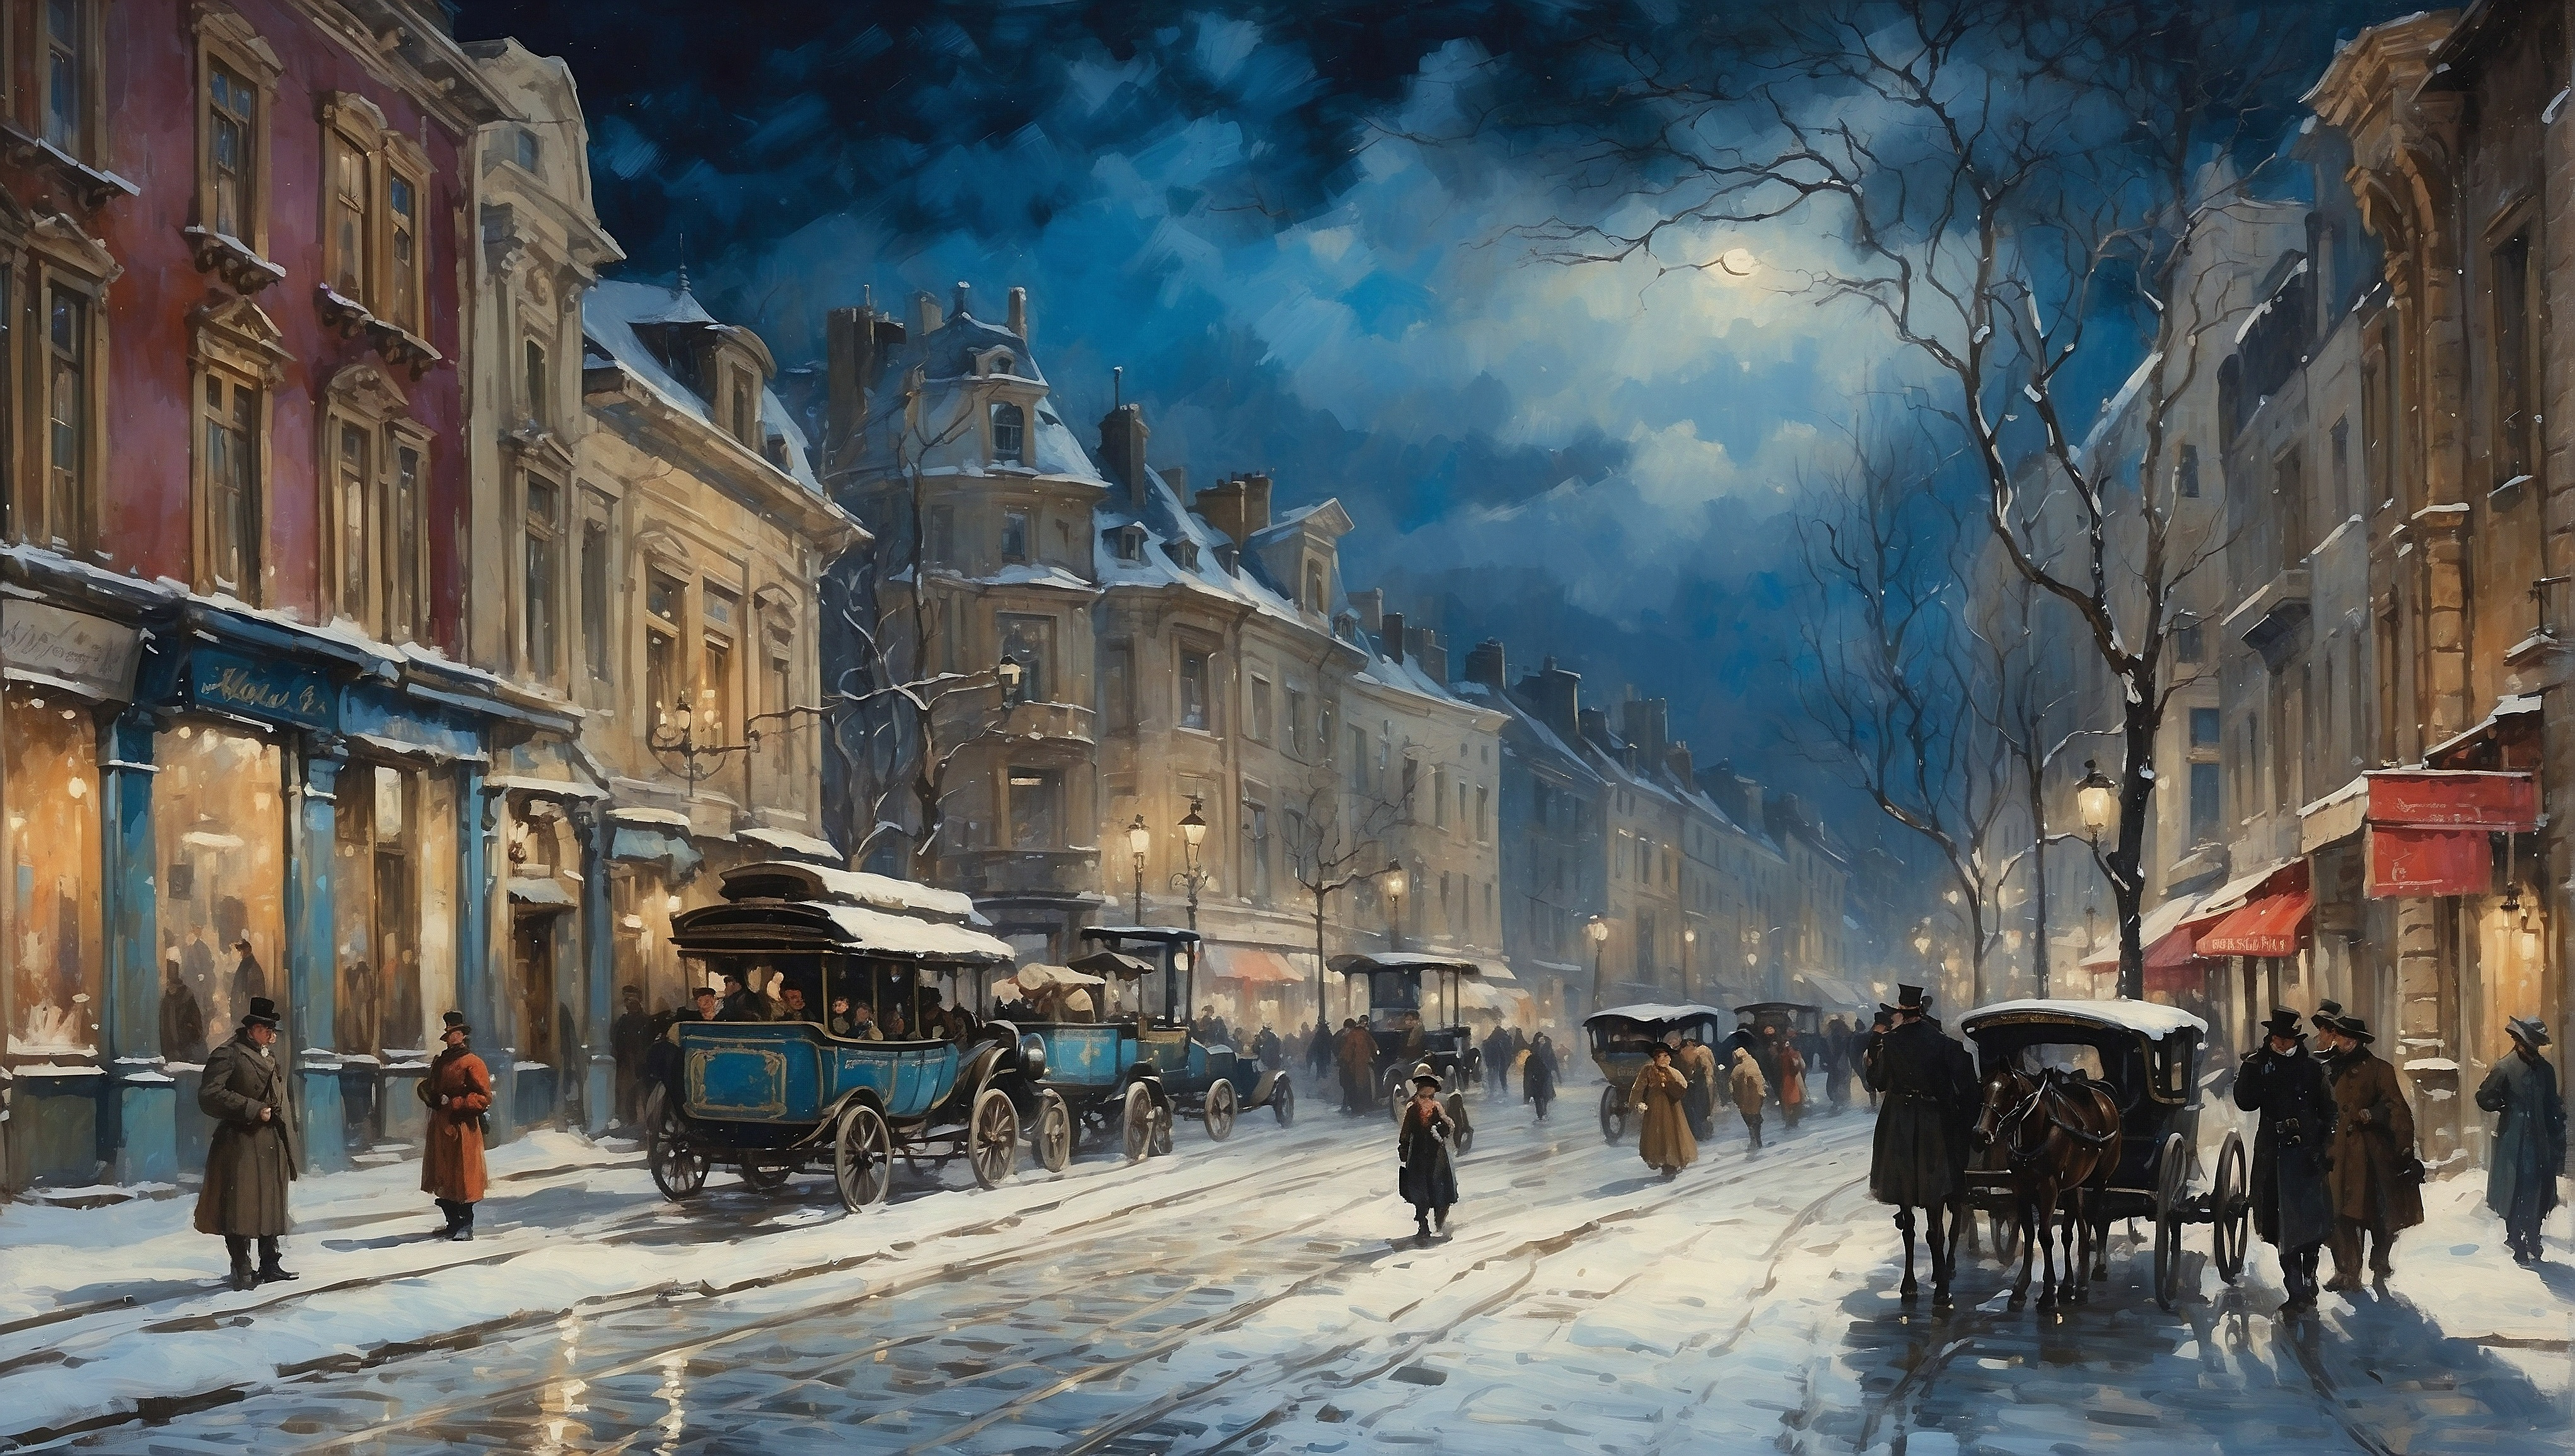 General 4084x2310 AI art digital art cityscape street carriage horse winter 19th century digital painting night sky clouds people street light building trees